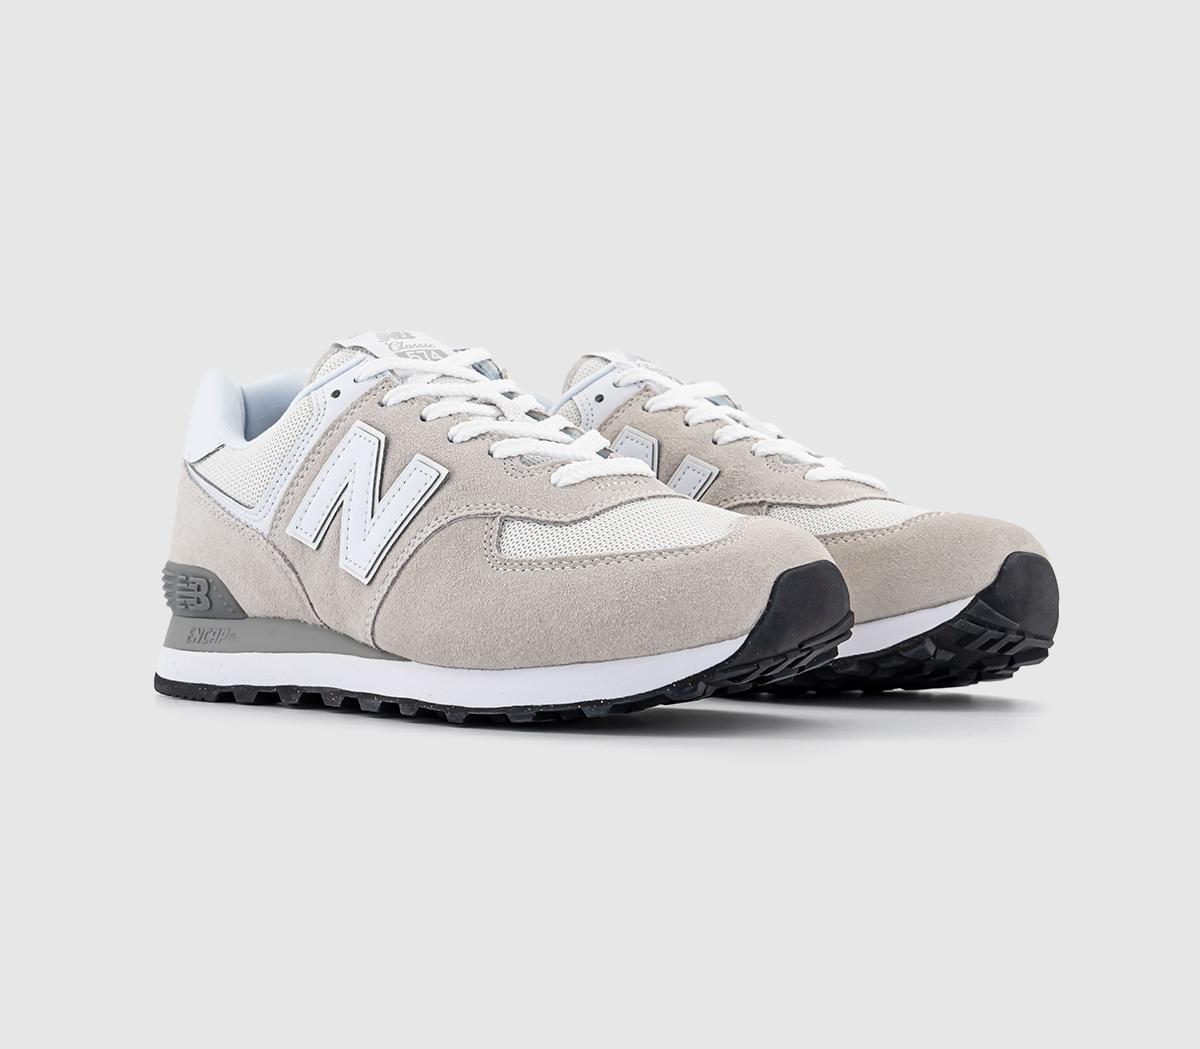 New Balance Mens 574 Trainers Light Grey White Black Green Leaf Rubber, 7.5